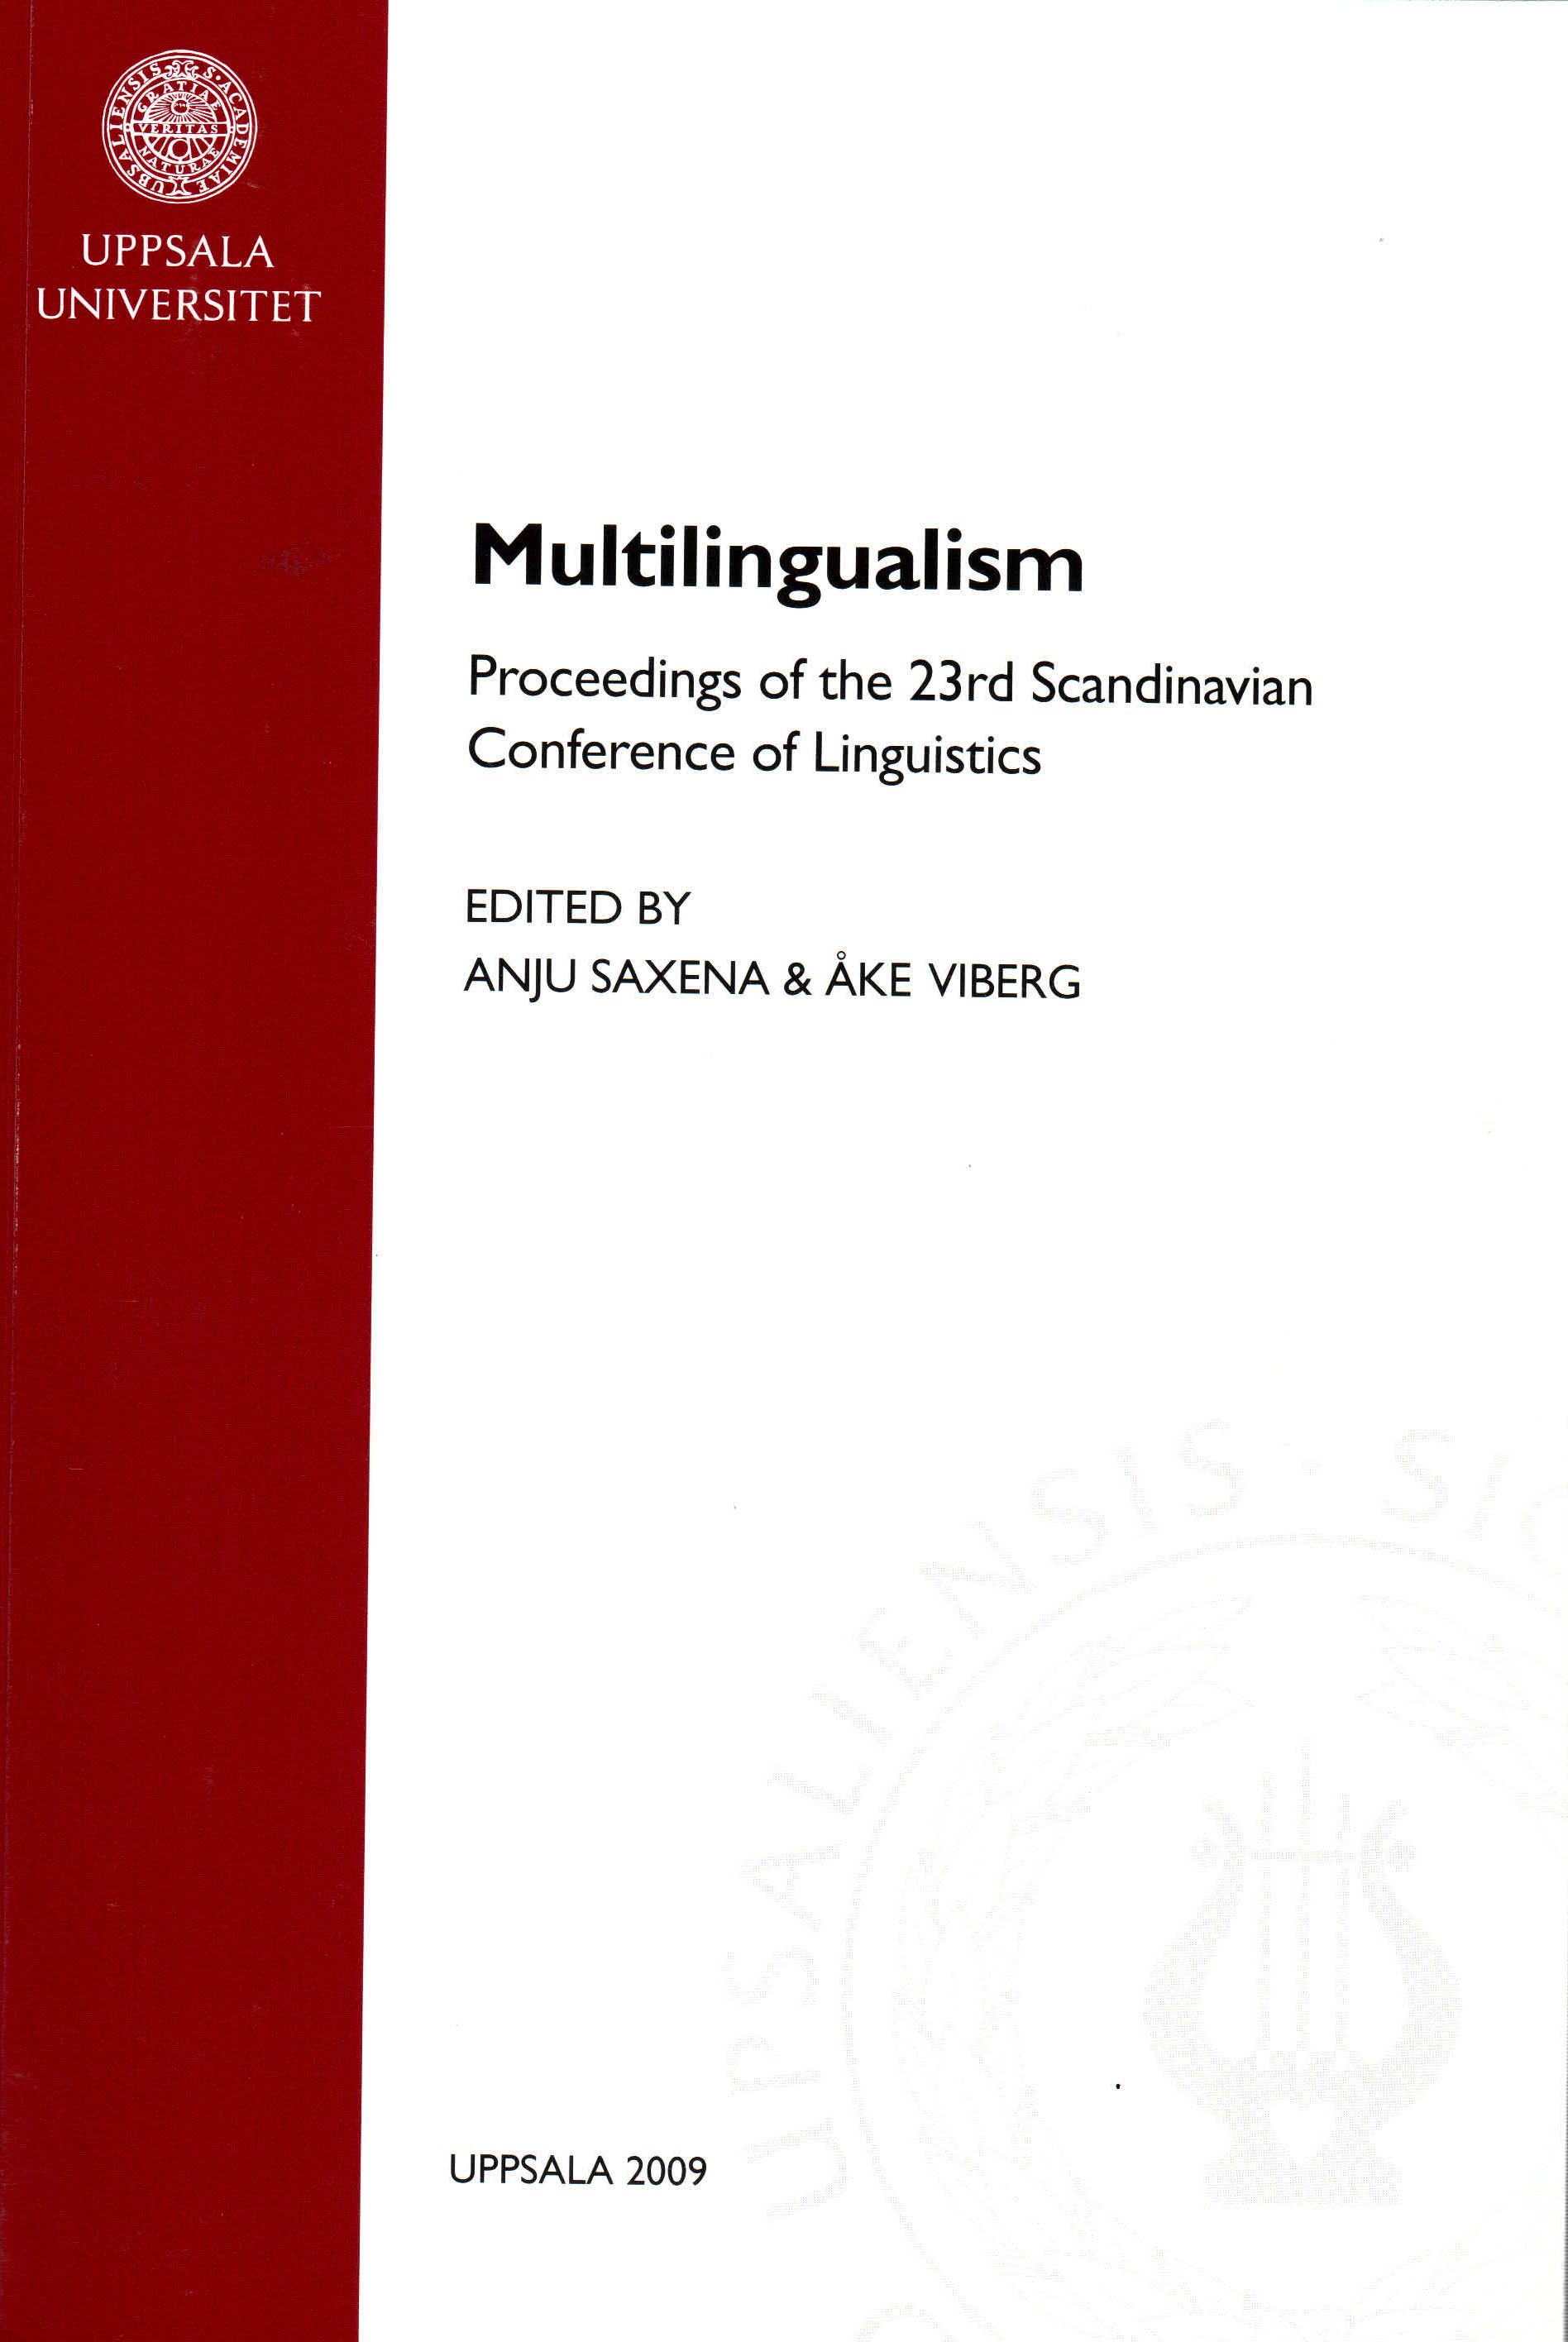 Multilingualism. Proceedings of the 23th Scandinavian Conference of Linguistics